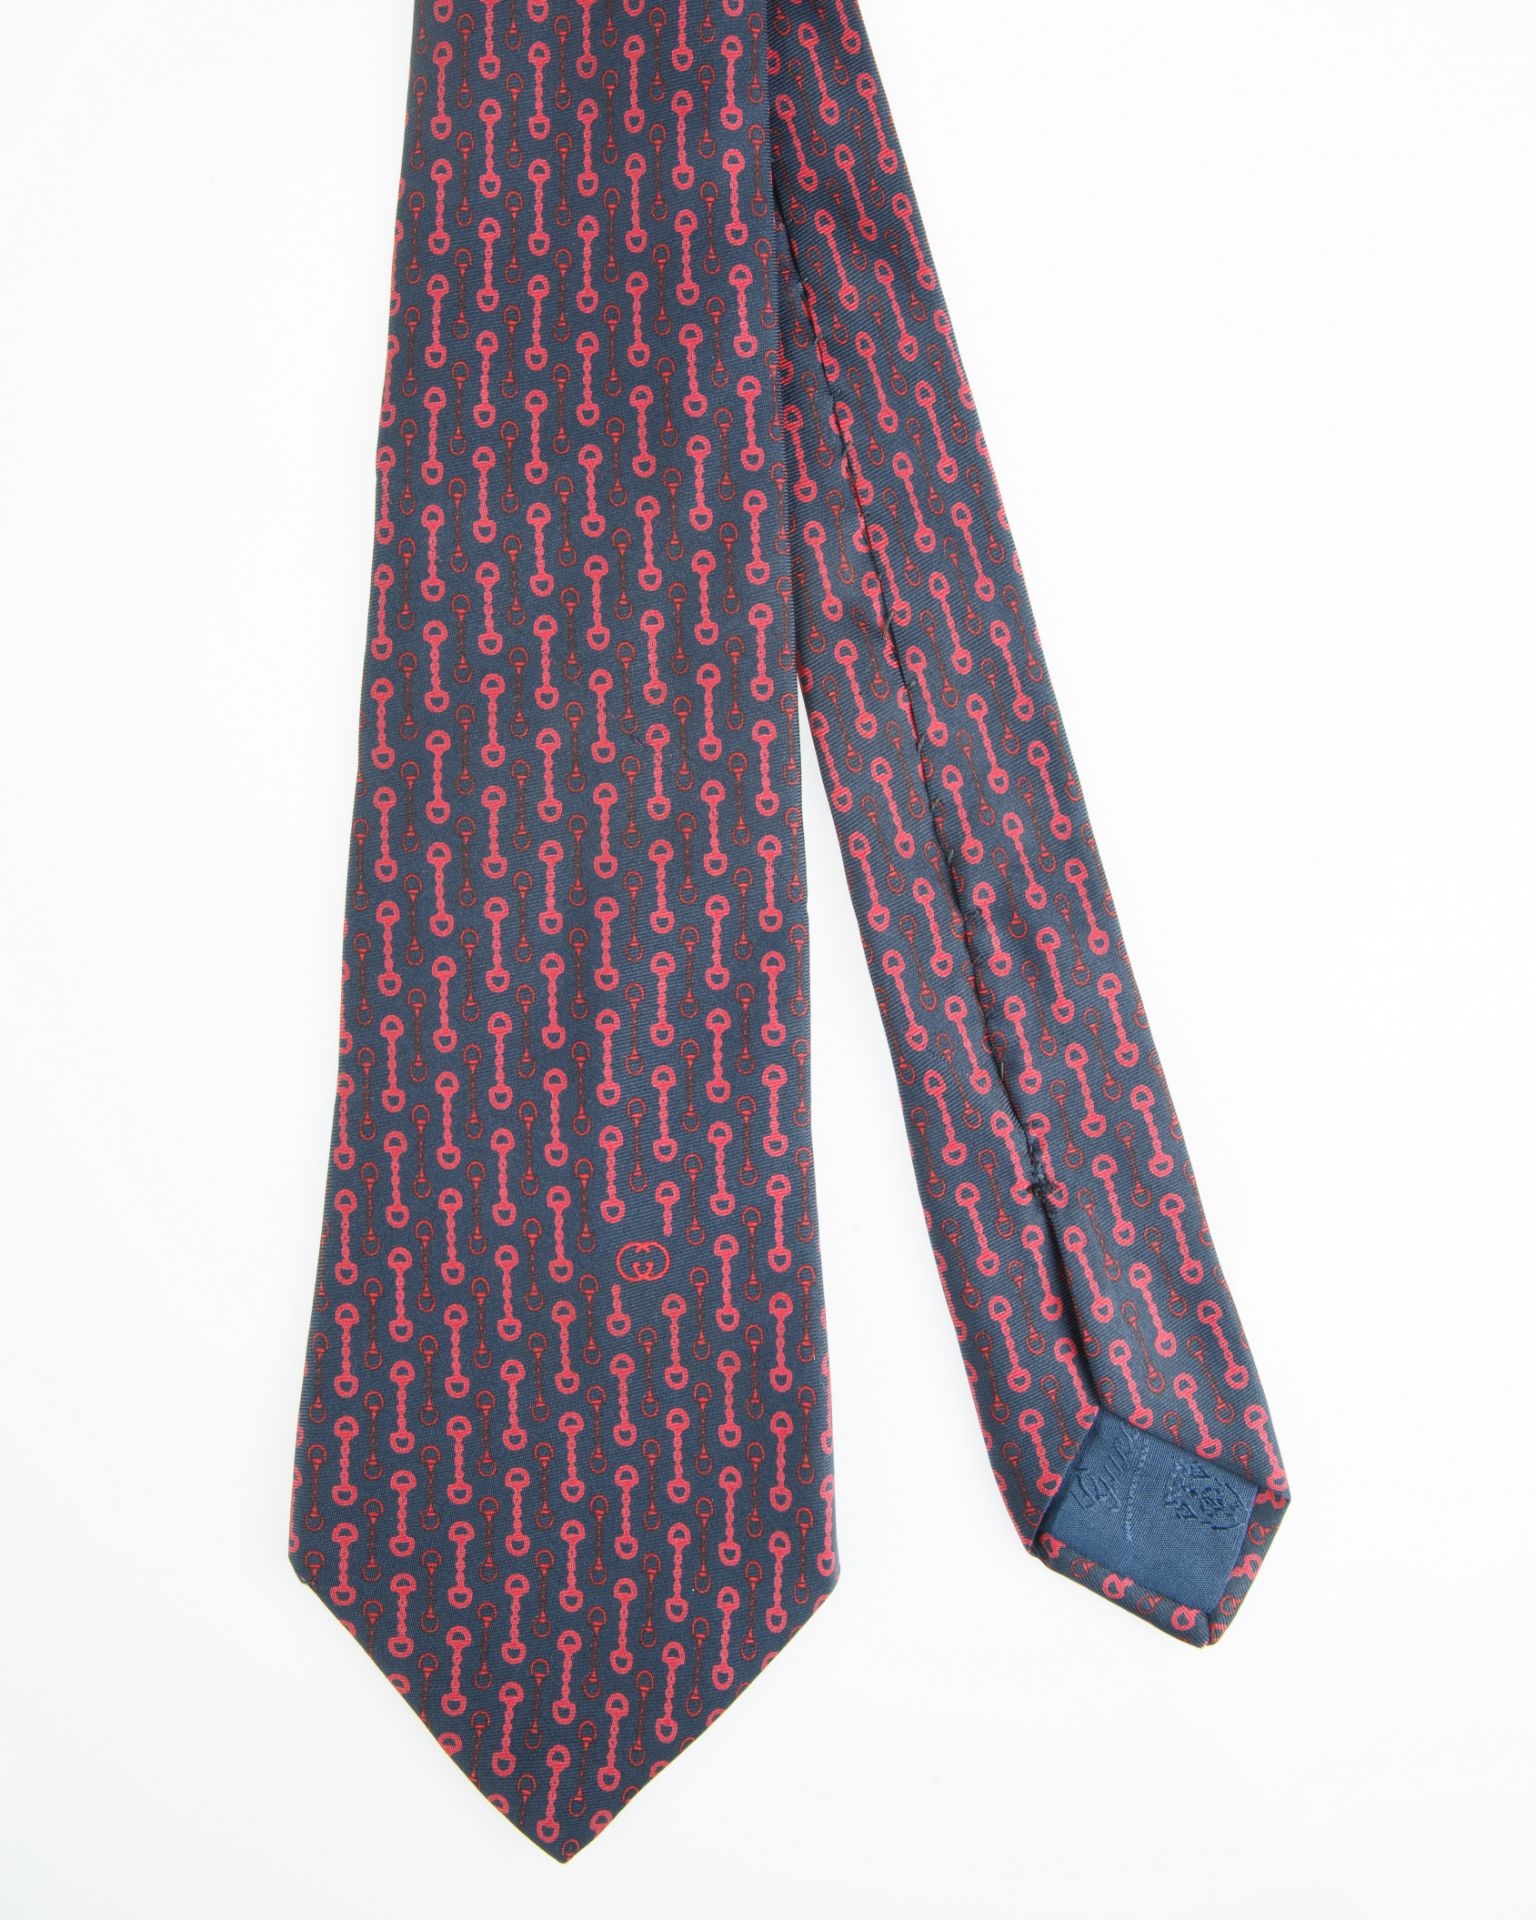 GROUP OF SEVEN GUCCI TIES - Image 10 of 15